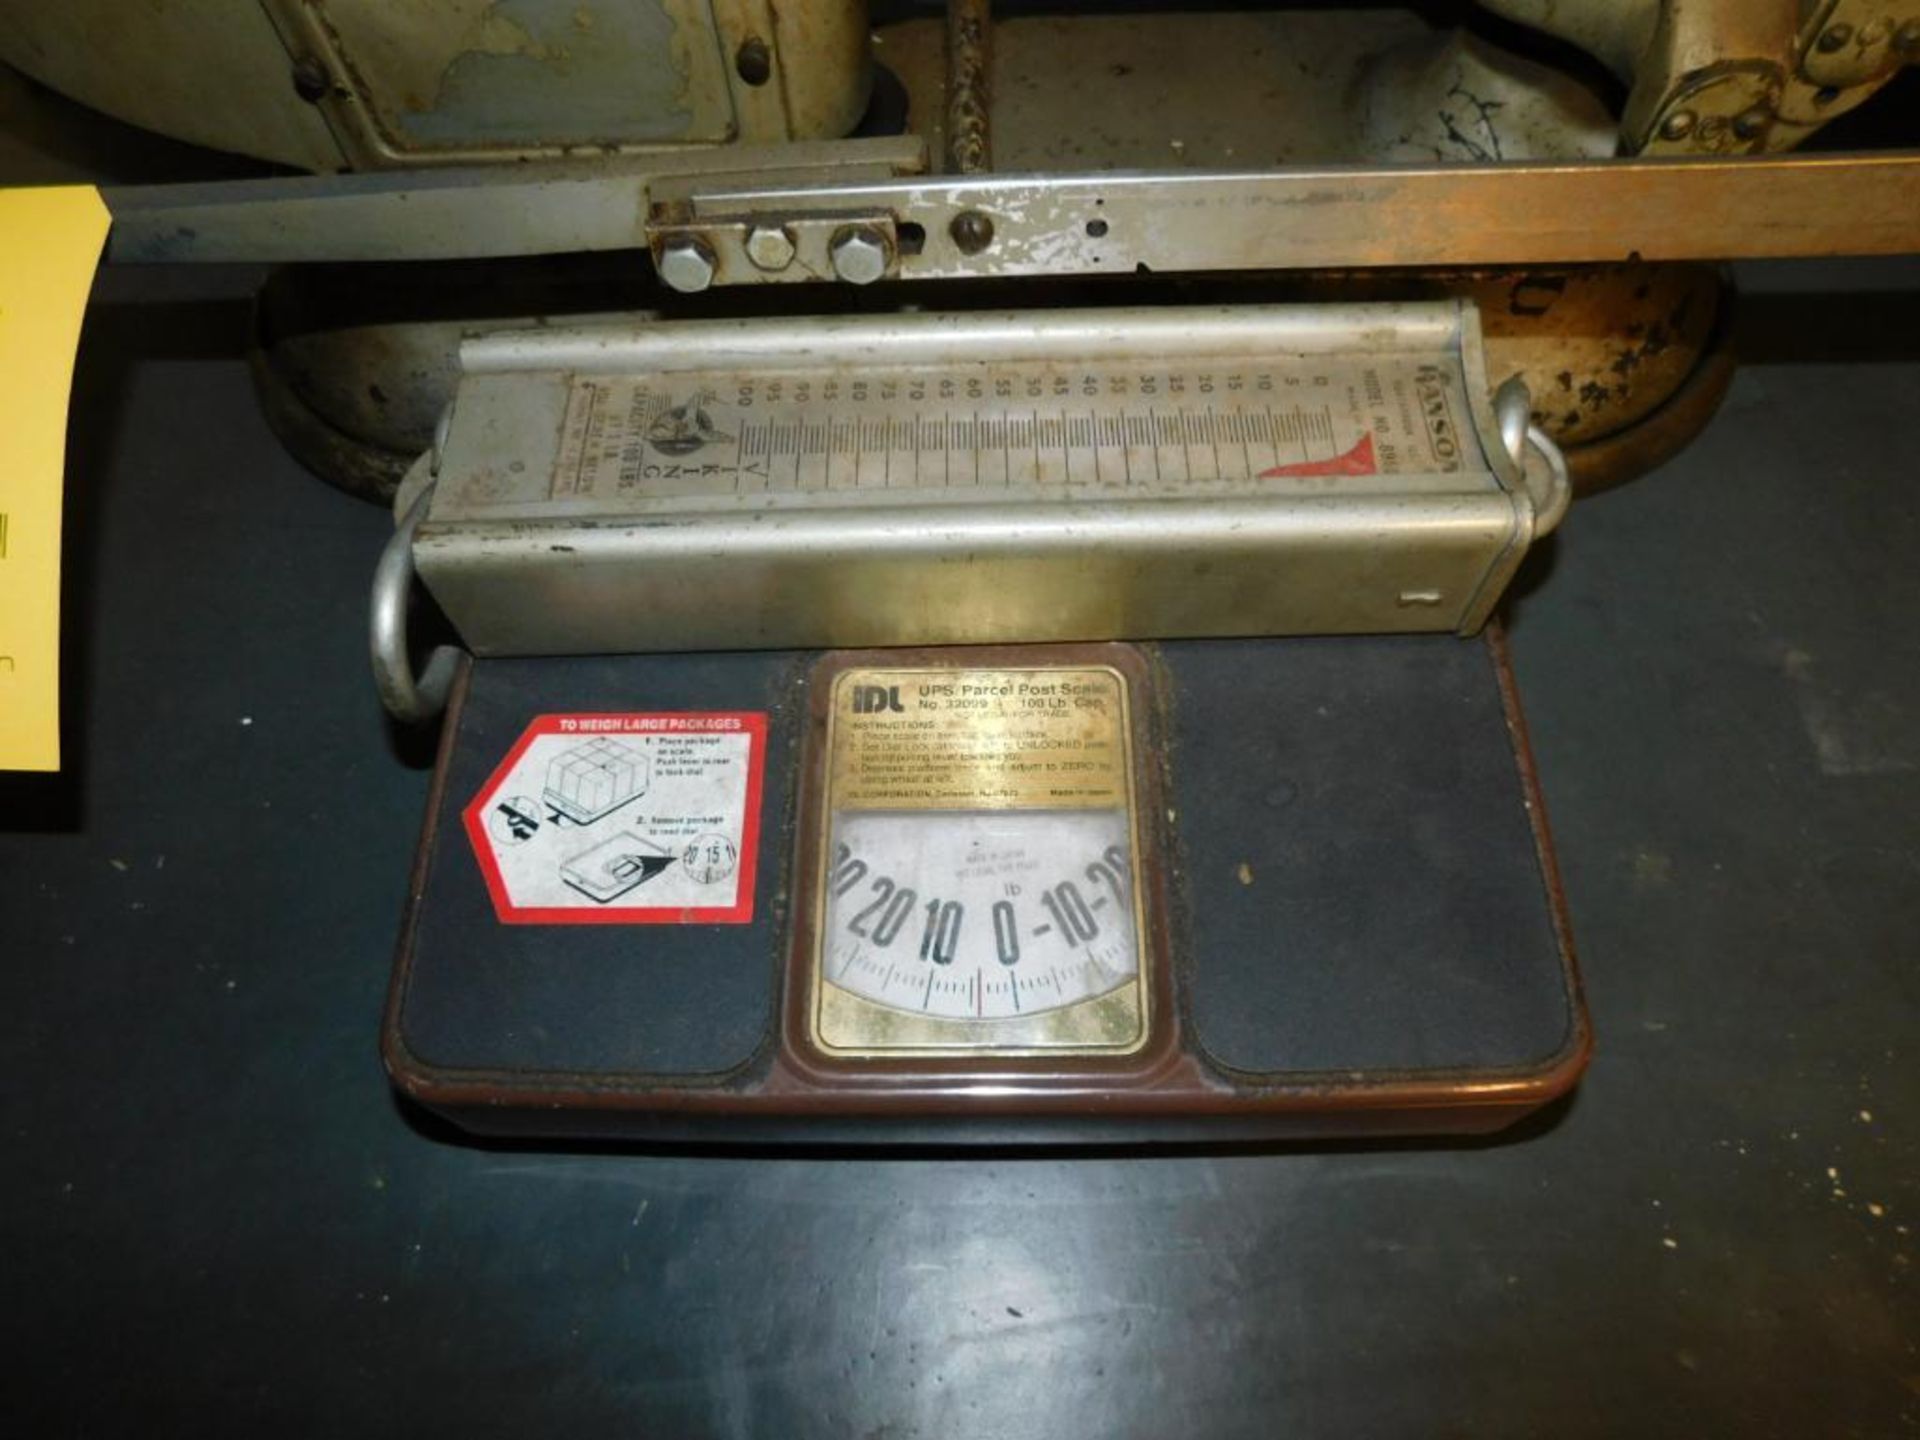 LOT: Vintage Counting Scale, Viking 100 Lb. Cap. Hanging Scale, 100 Lb. Cap. Parcel Post Scale - Image 6 of 7